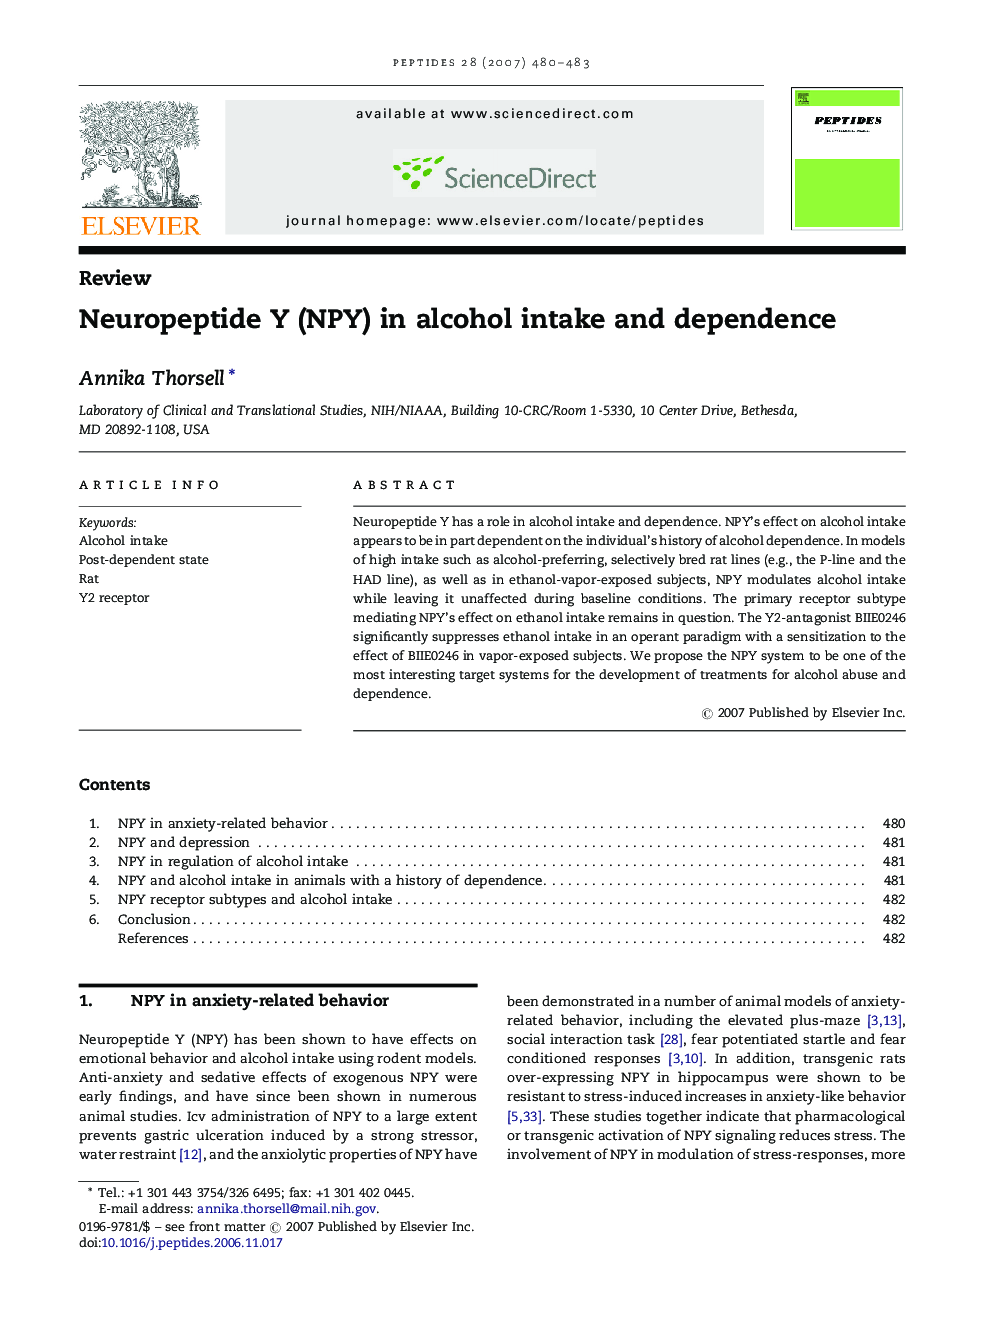 Neuropeptide Y (NPY) in alcohol intake and dependence